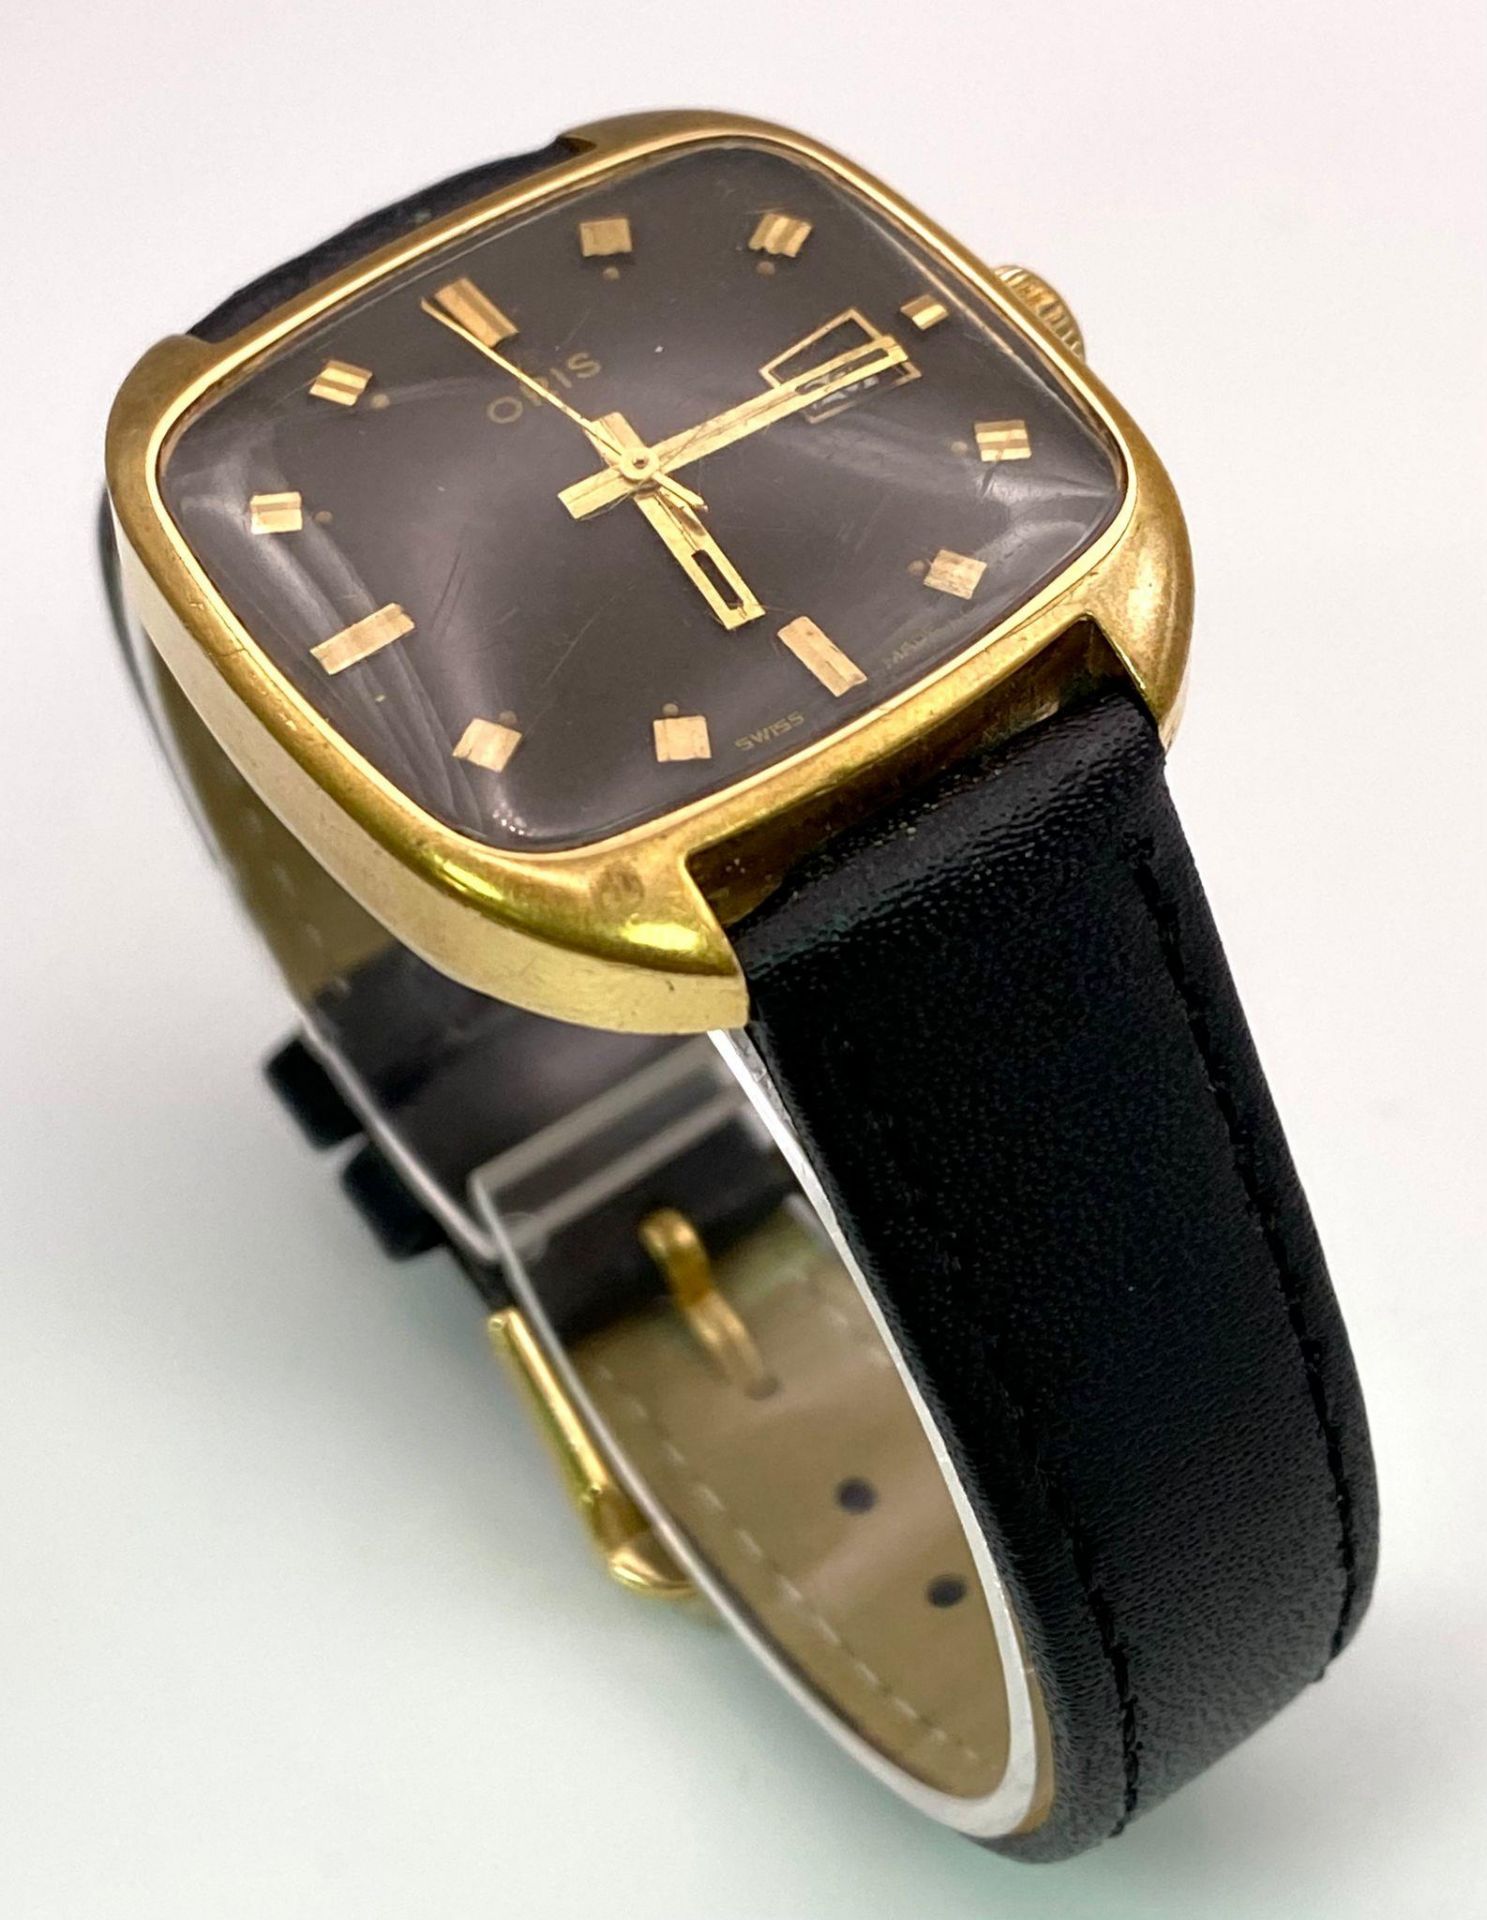 A Vintage 1950s Oris Gents Mechanical Watch. Black leather strap. Gold plated square case - 31mm. - Image 2 of 11